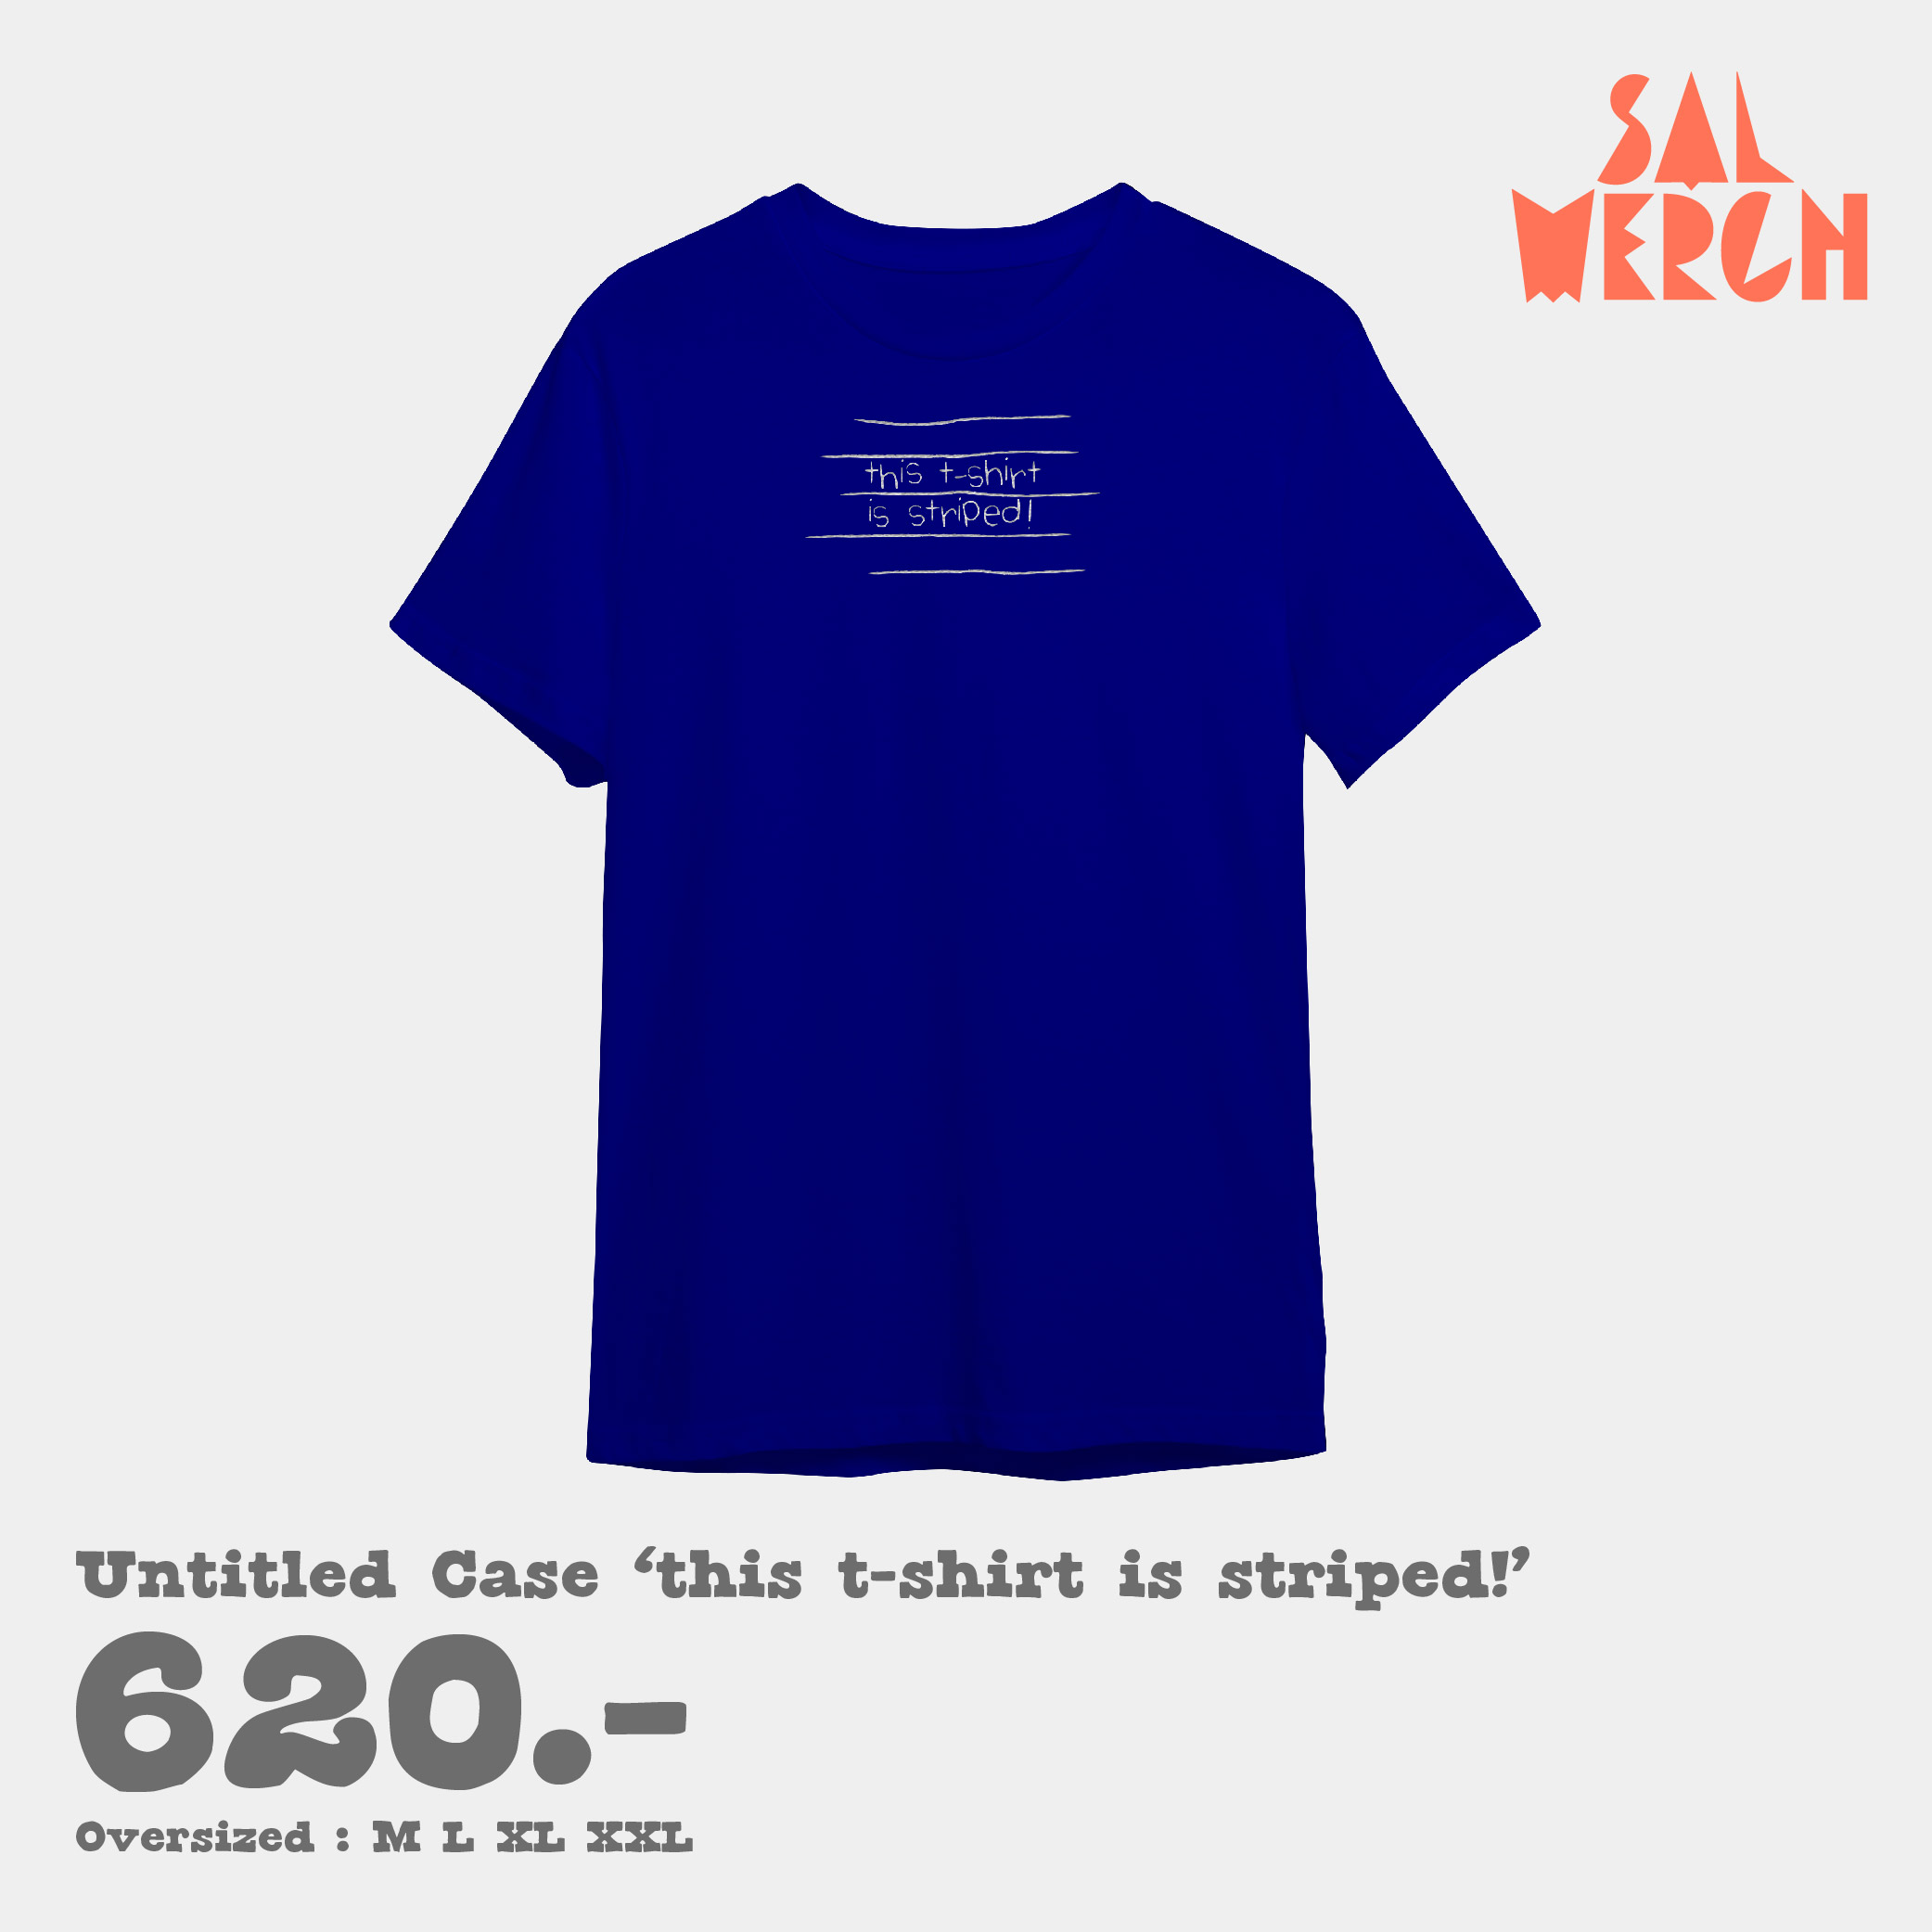 UNTITLED CASE "this t-shirt is striped" SIZE M